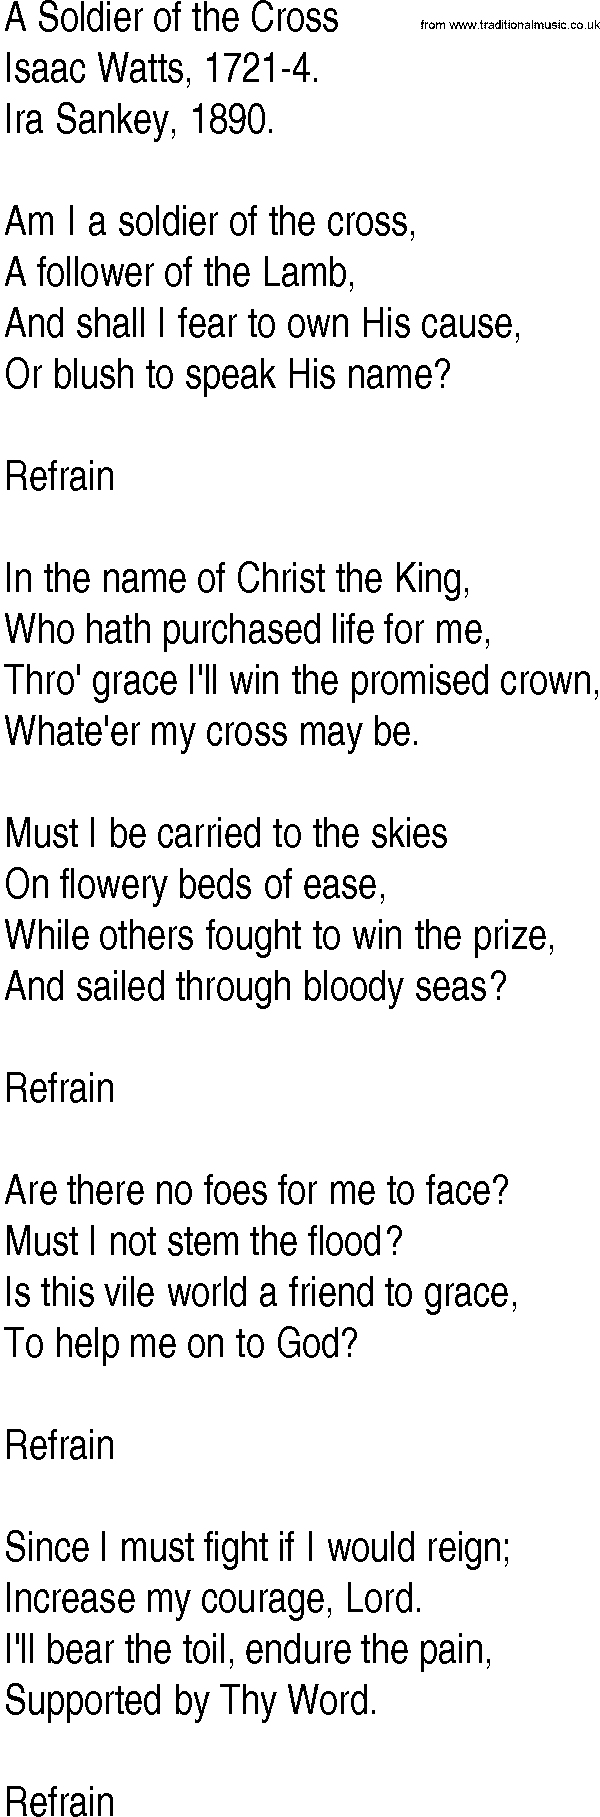 Hymn and Gospel Song: A Soldier of the Cross by Isaac Watts lyrics